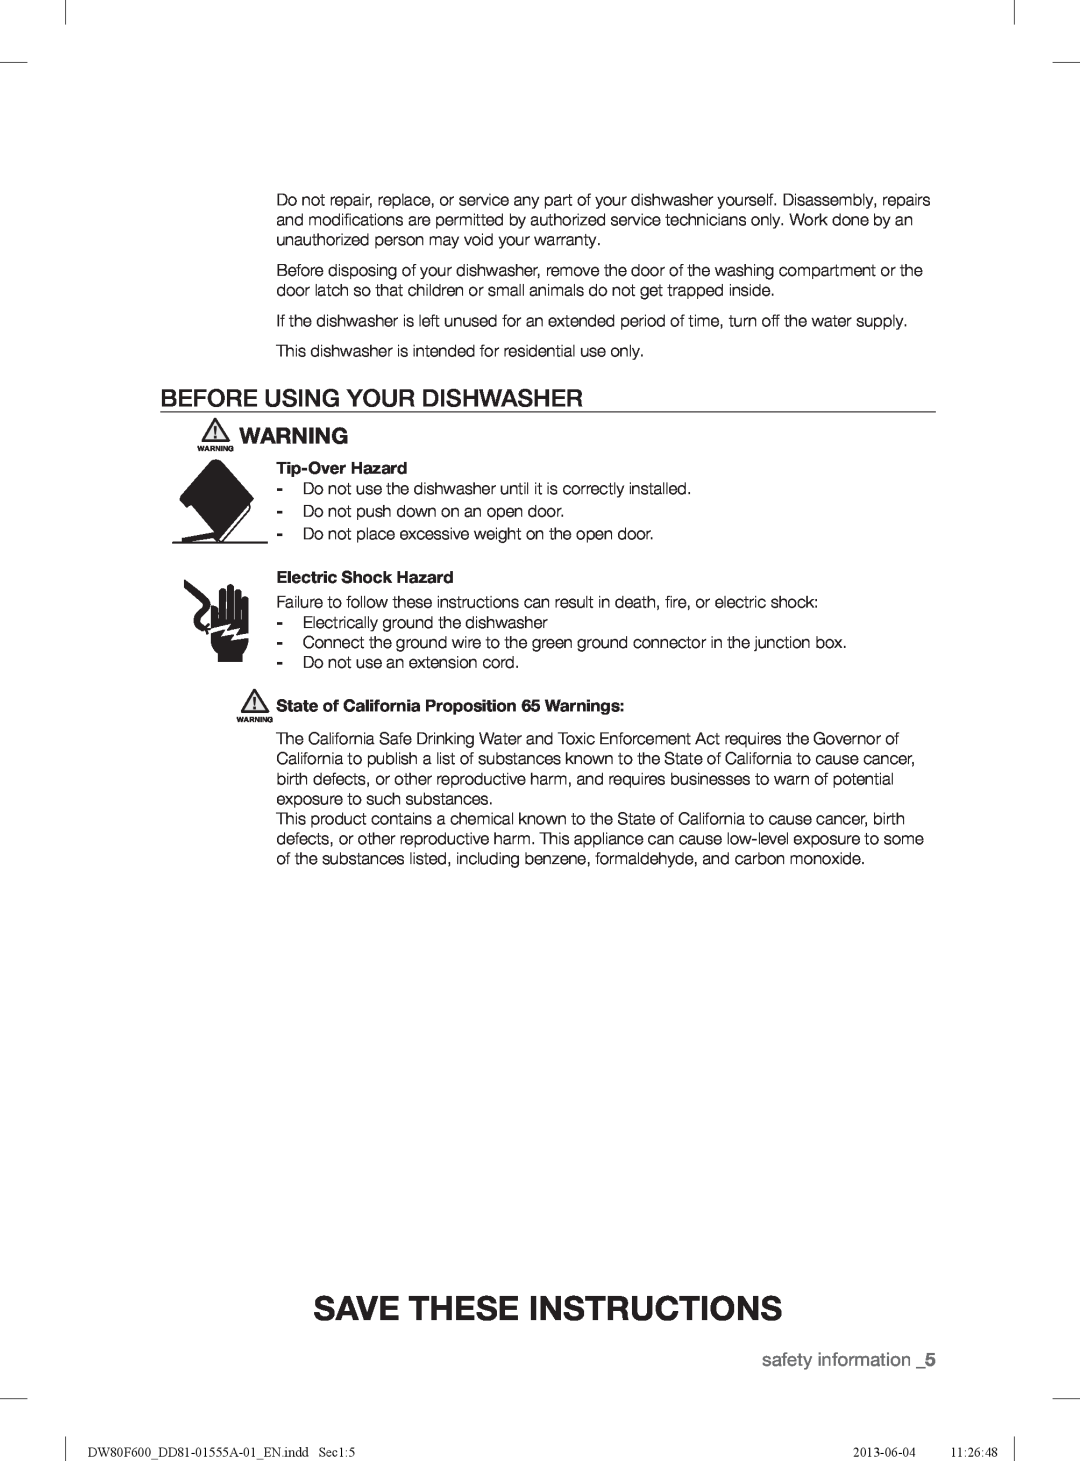 Samsung DW80F600UTS Before Using Your Dishwasher, Tip-Over Hazard, Electric Shock Hazard, Save These Instructions 